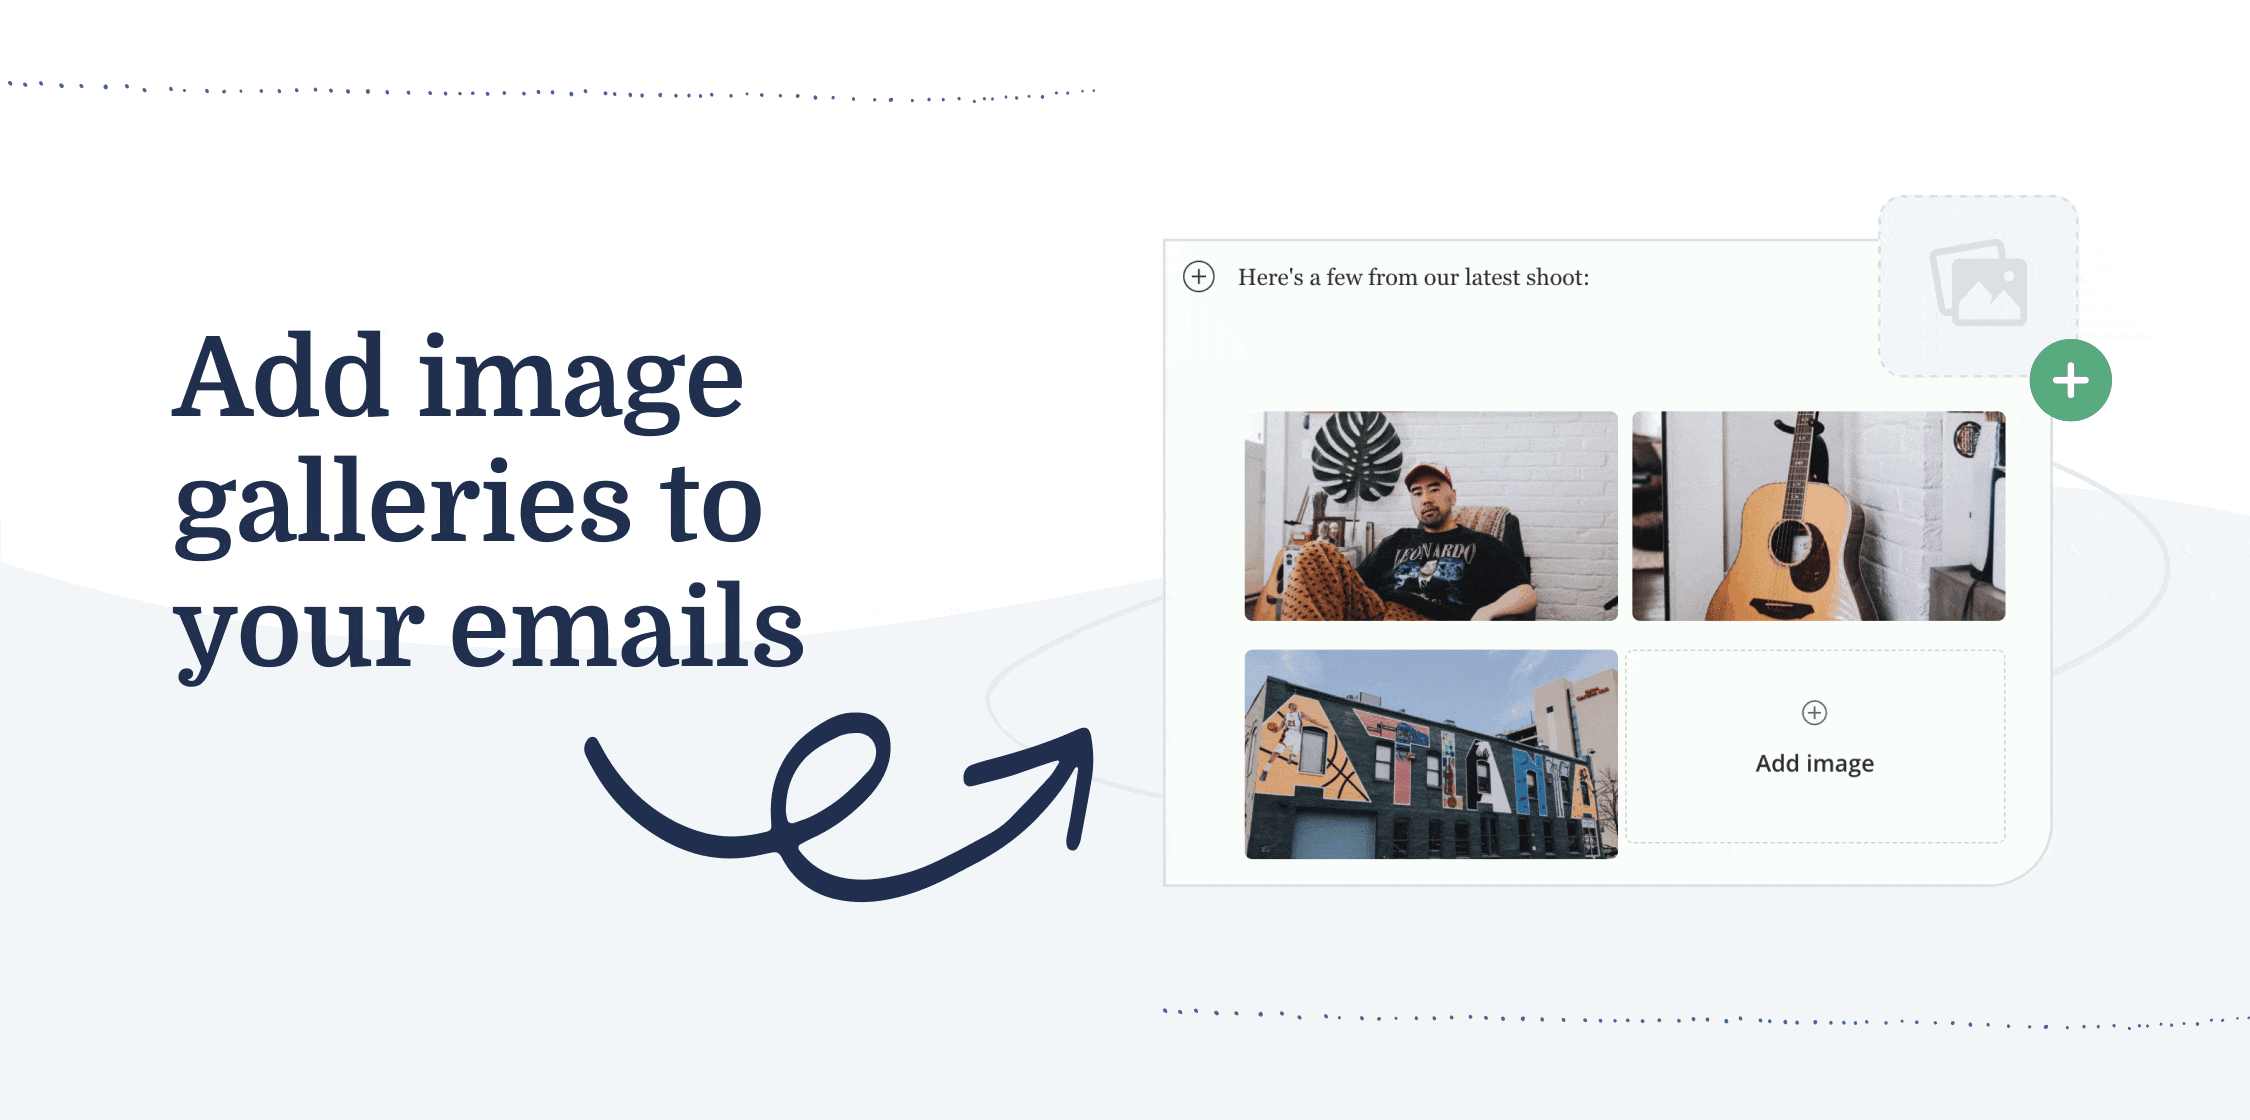 Learn more about image galleries in emails